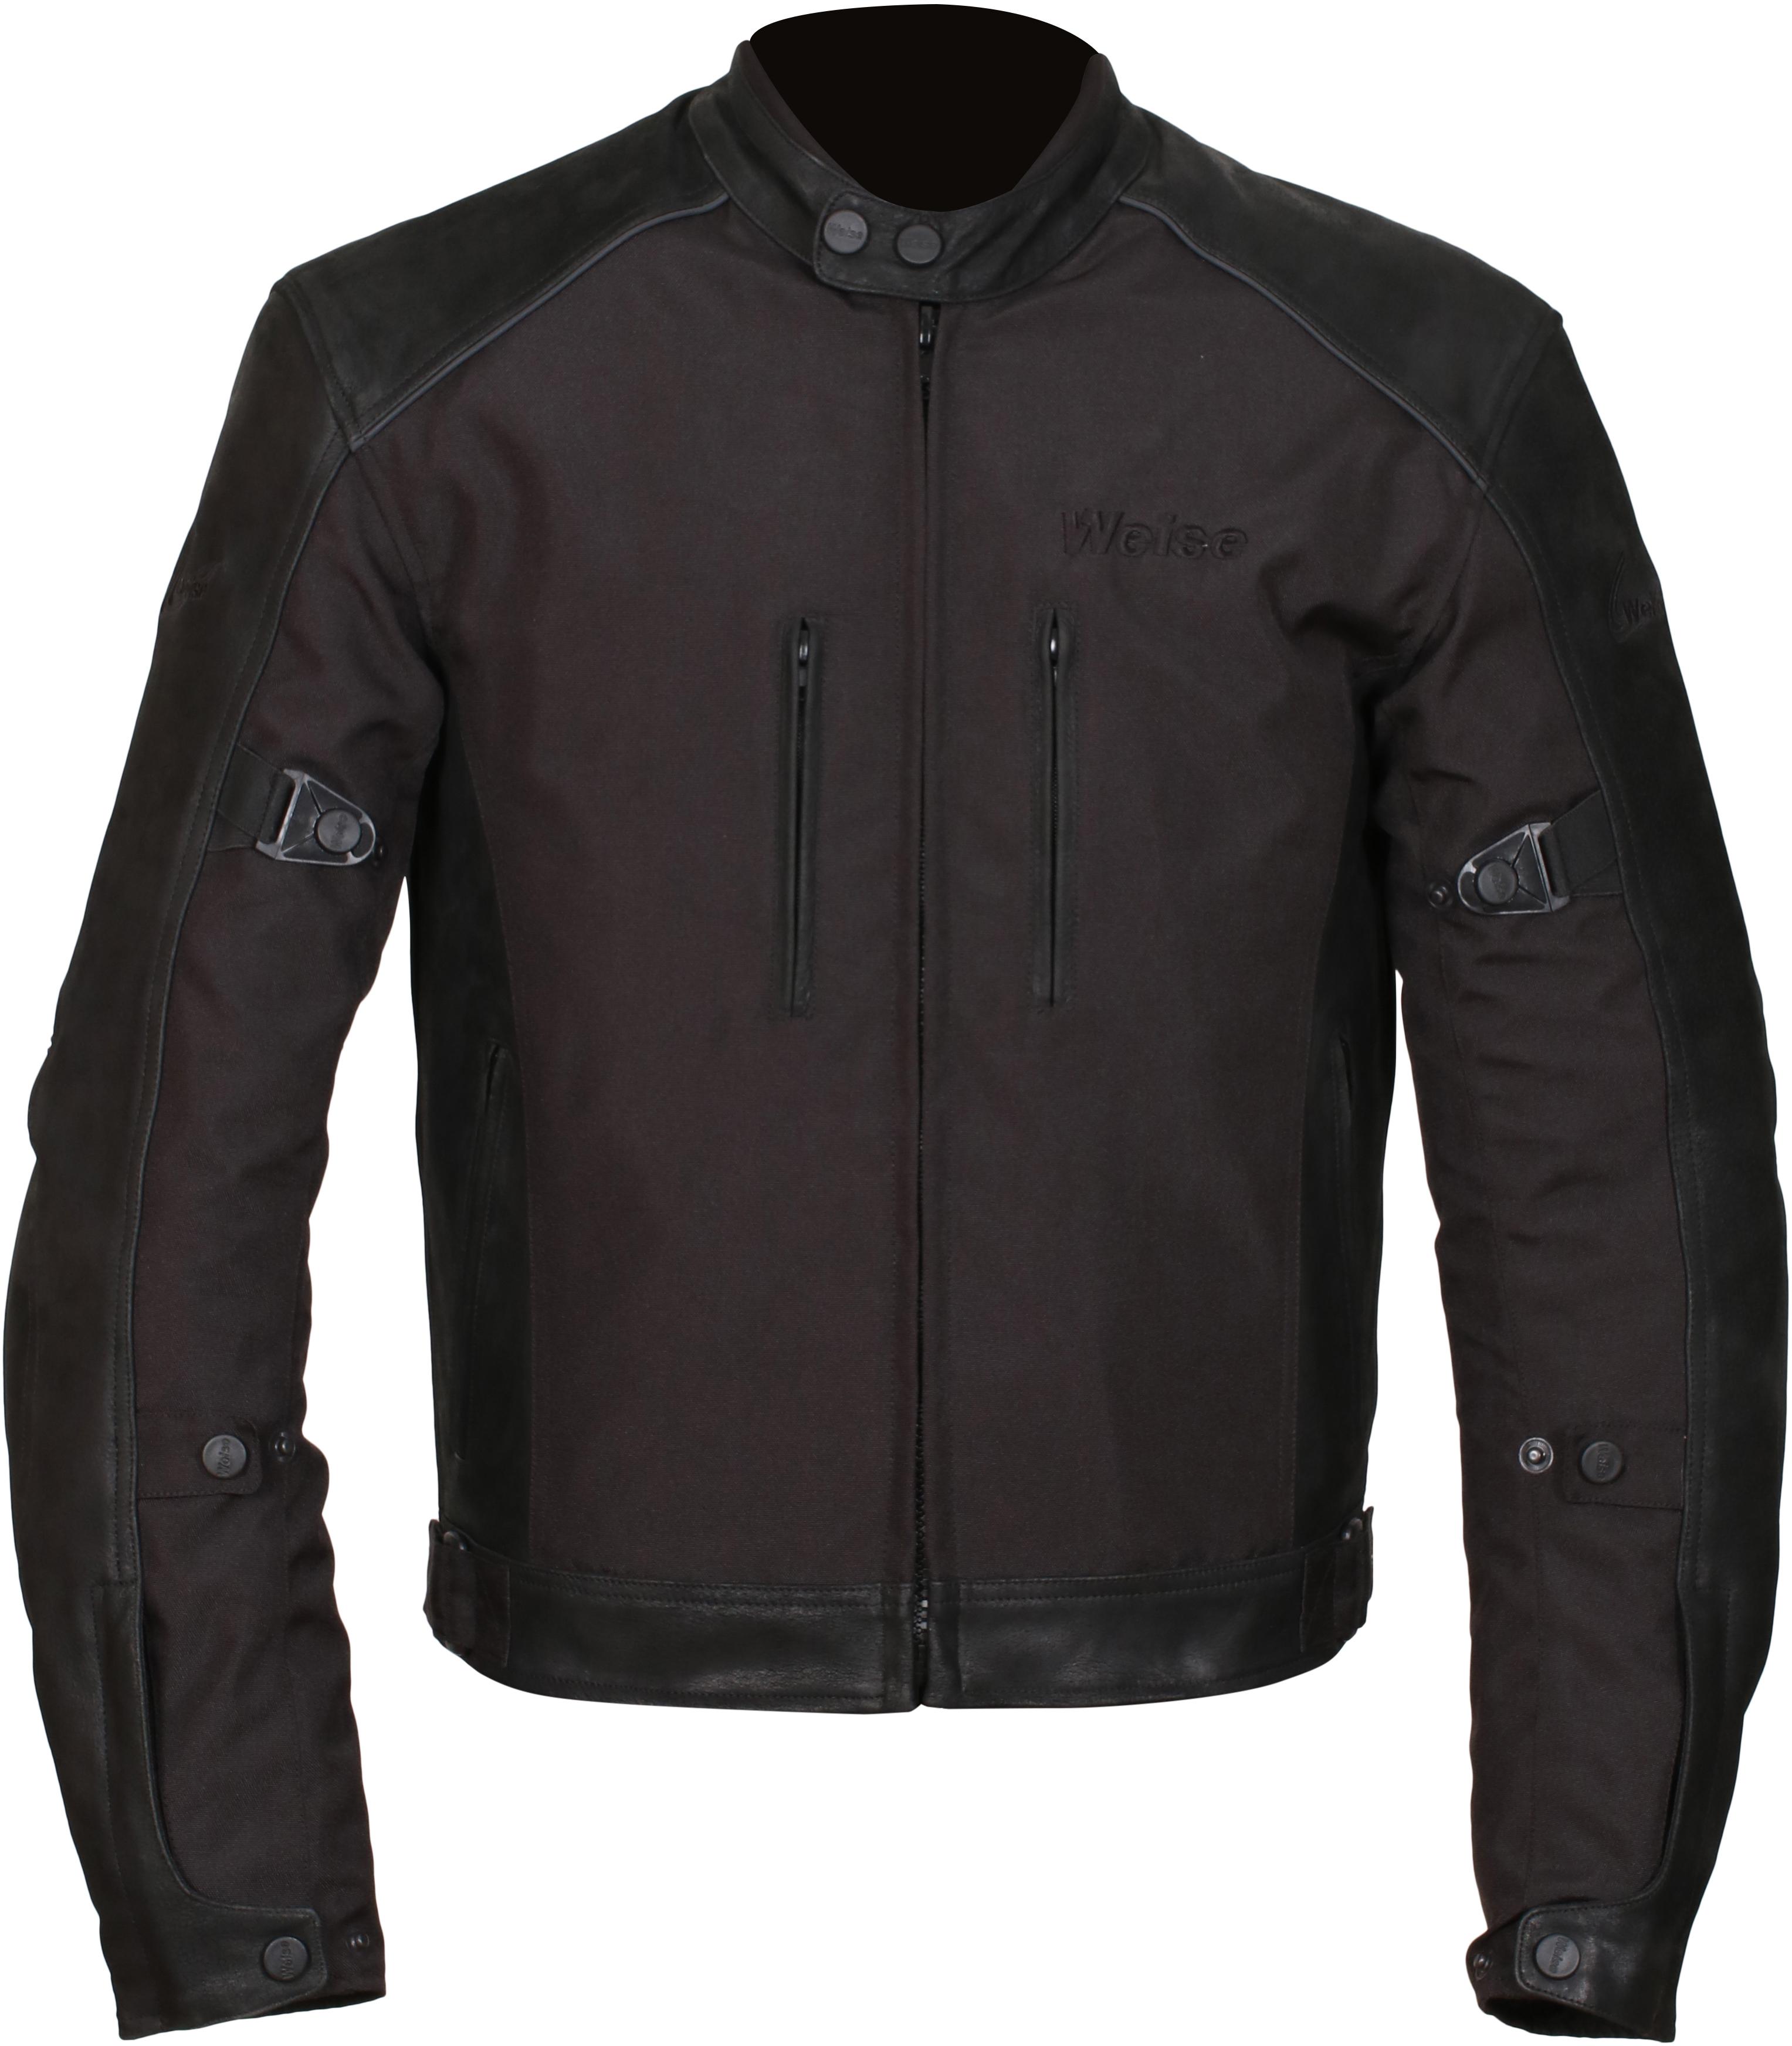 Weise Mission Motorcycle Jacket - Black, 2Xl